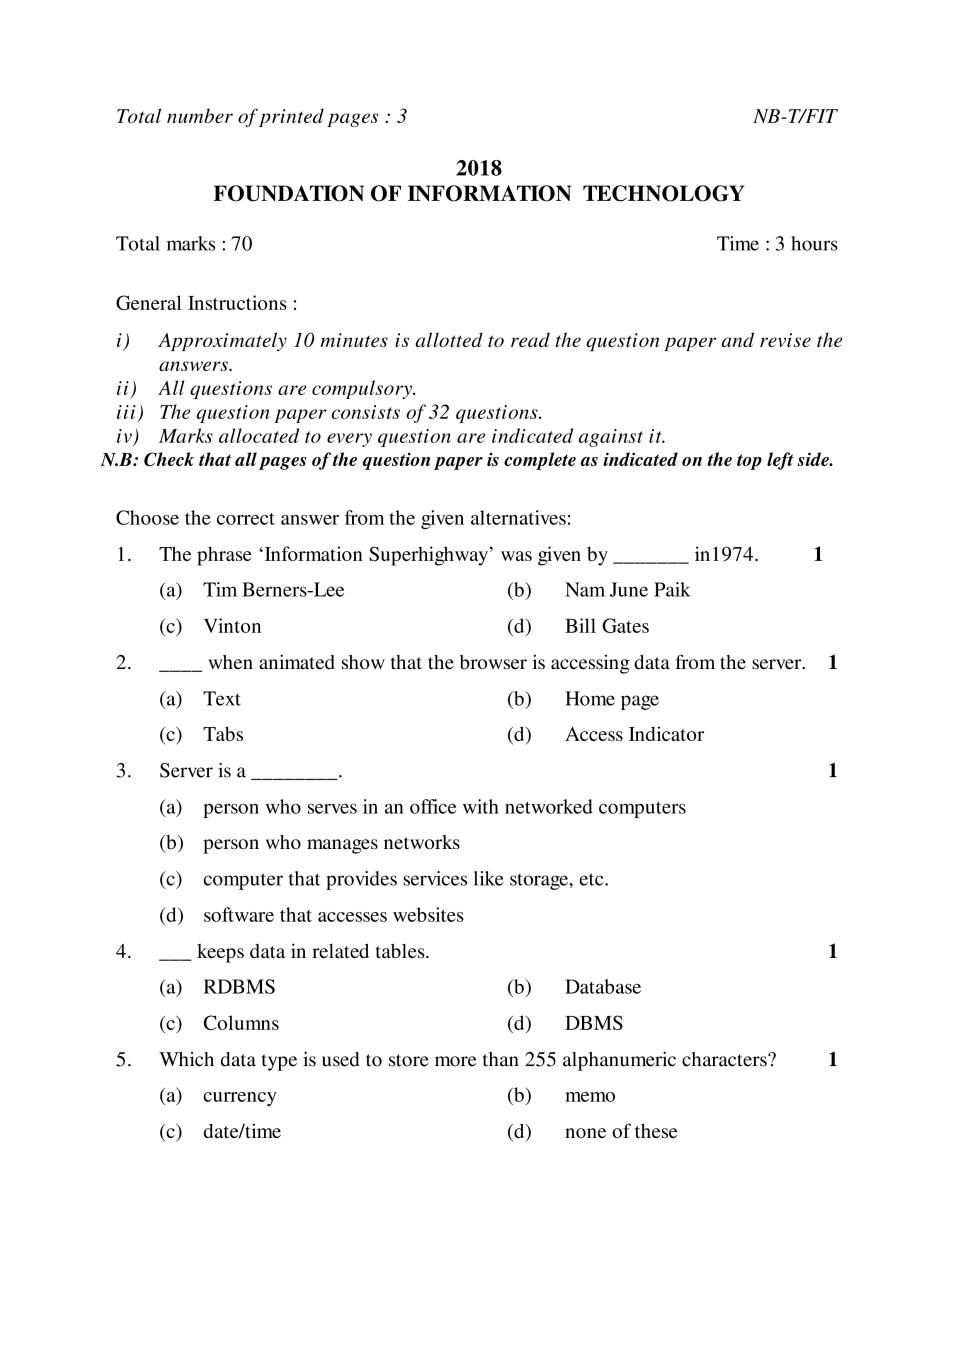 NBSE Class 10 Question Paper 2018 for Foundation of Information Technology - Page 1